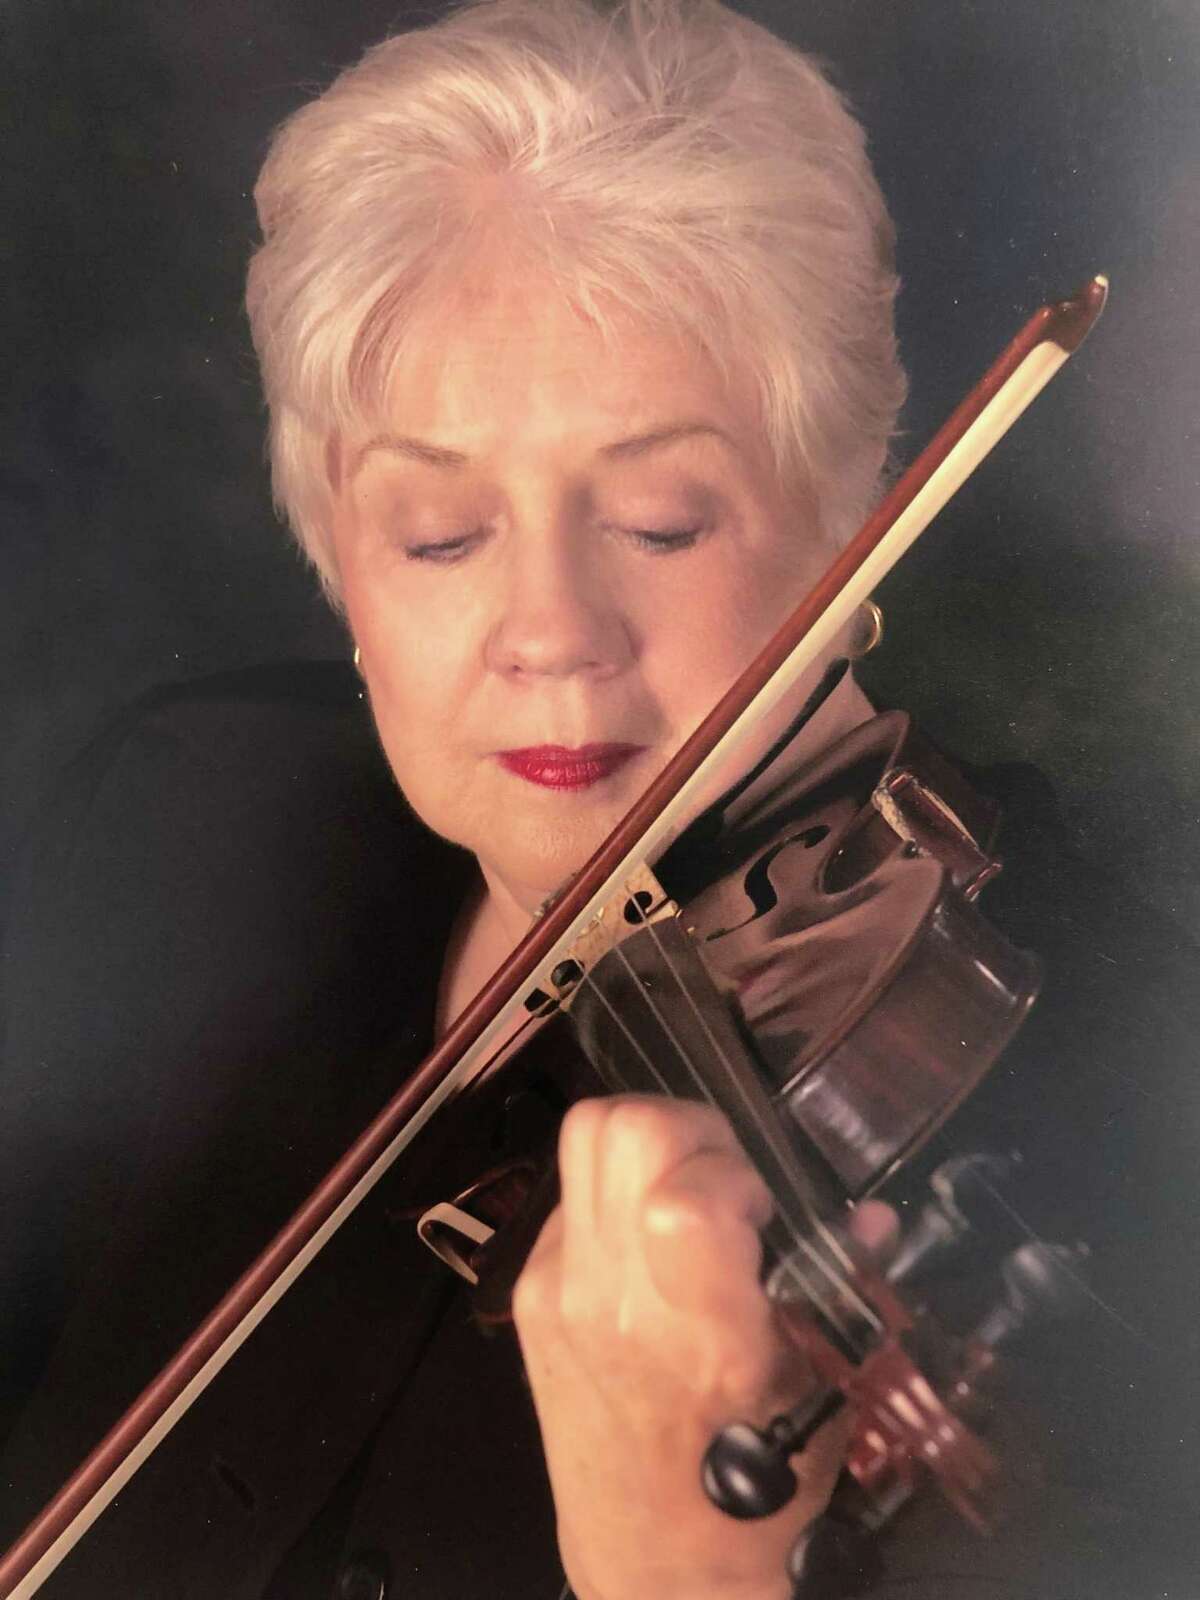 The Conroe arts community is mourning the passing of symphony visionary Mary Curtis Taylor. She was a founding member of the Conroe Symphony Orchestra and longtime musician with the group. She died on Sept. 3.